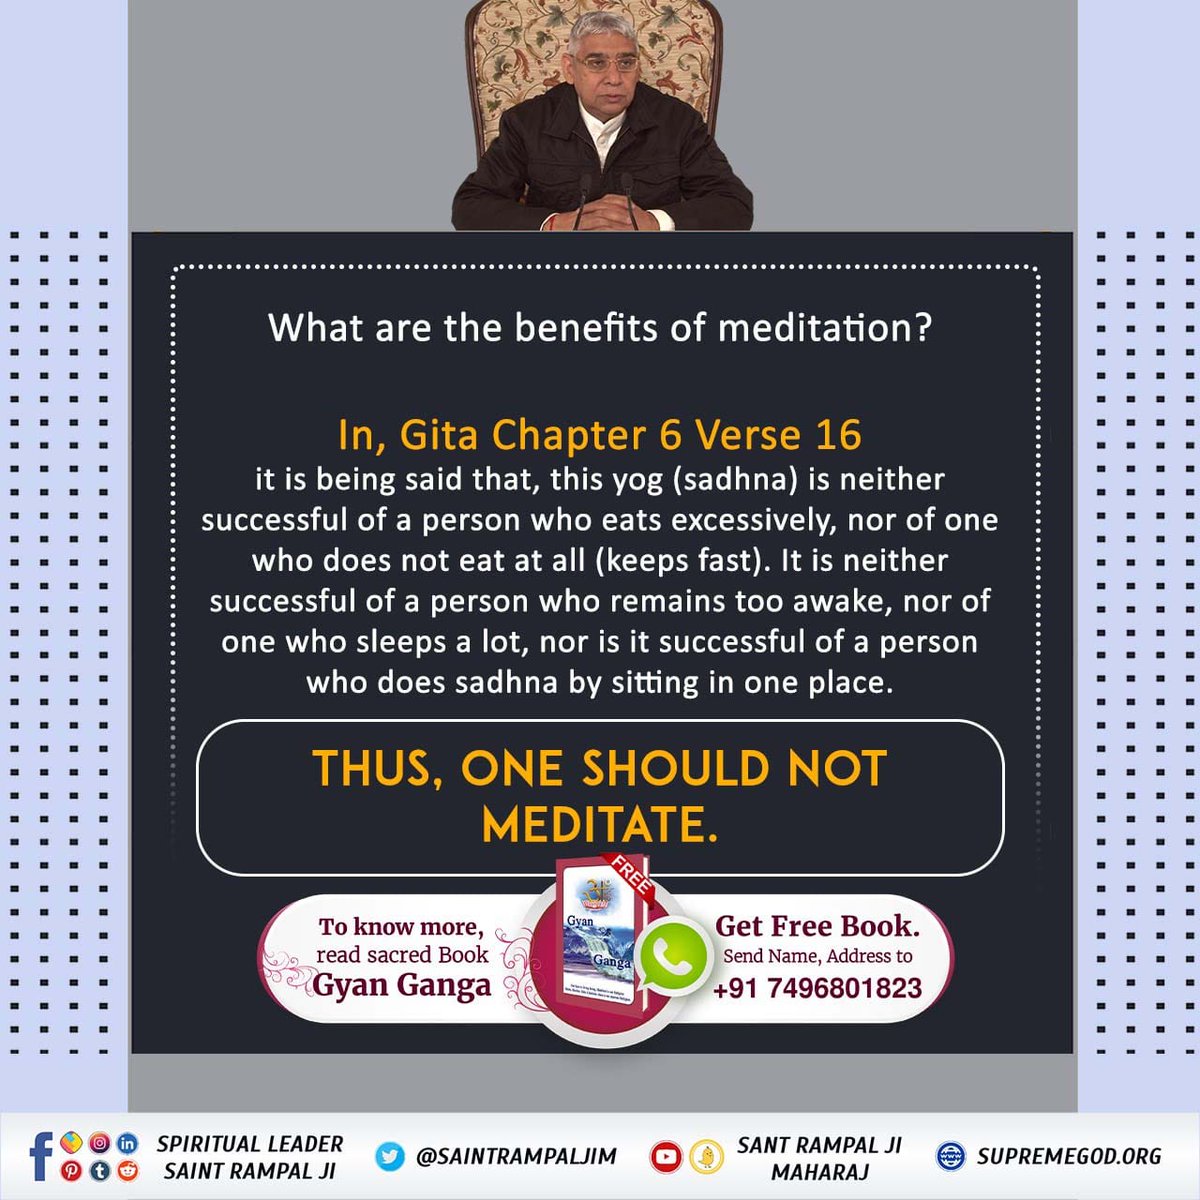 #What_Is_Meditation
Meditation in itstrue essence is transcending the realm ofthe physical and embracing the infinite bliss of the Divine. It goes beyond mere relaxation and opens thepath to profound enlightenment and liberation.Explore more follow our Twitter handle @sanewsdelhi